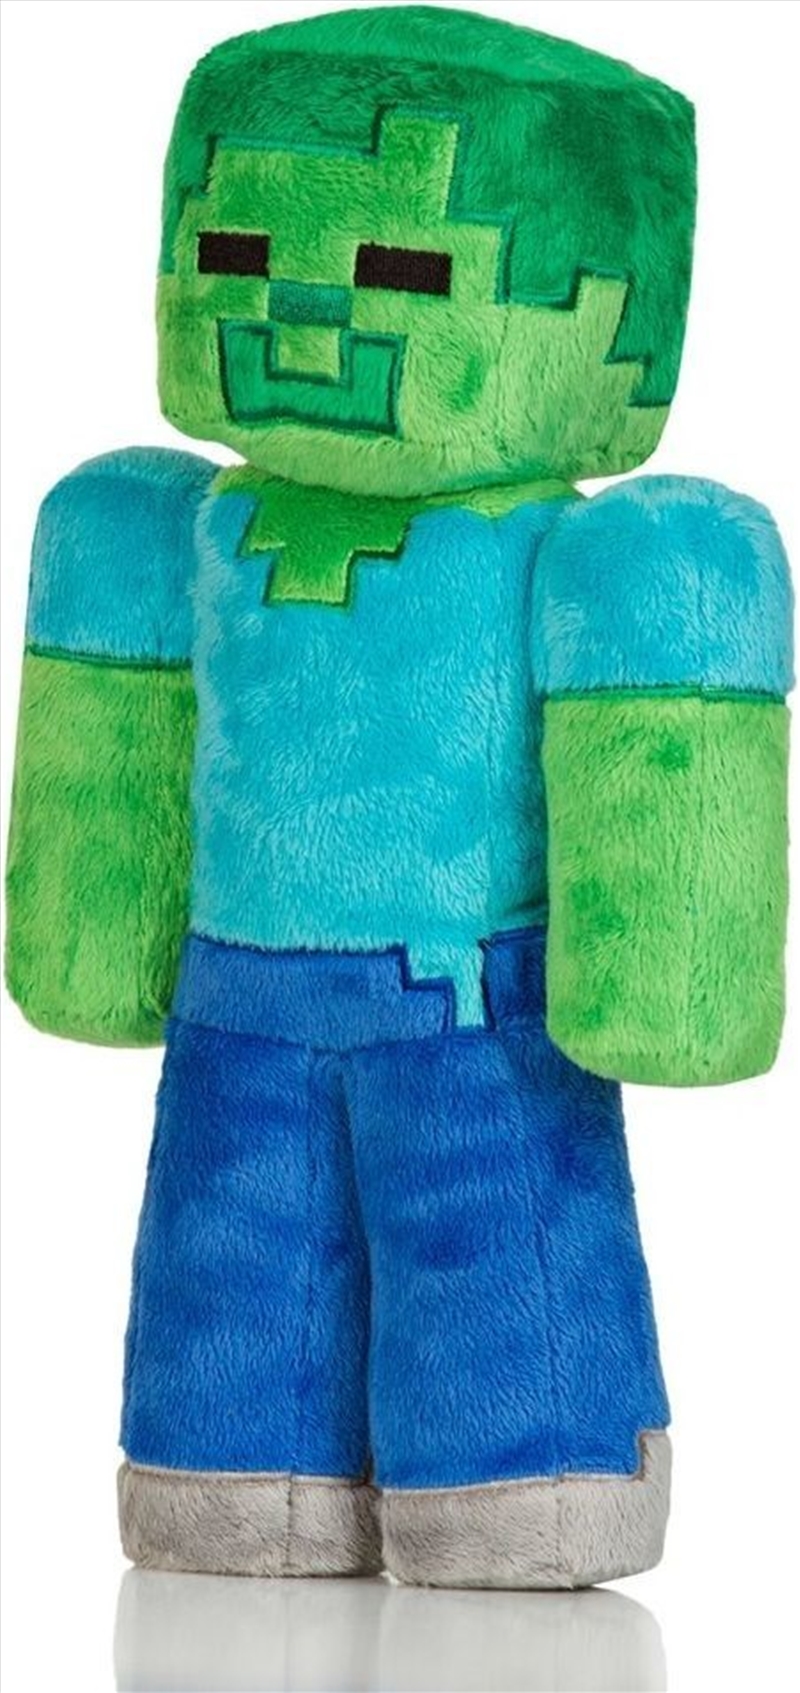 Minecraft 12" Zombie Plush with Hang Tag/Product Detail/Plush Toys